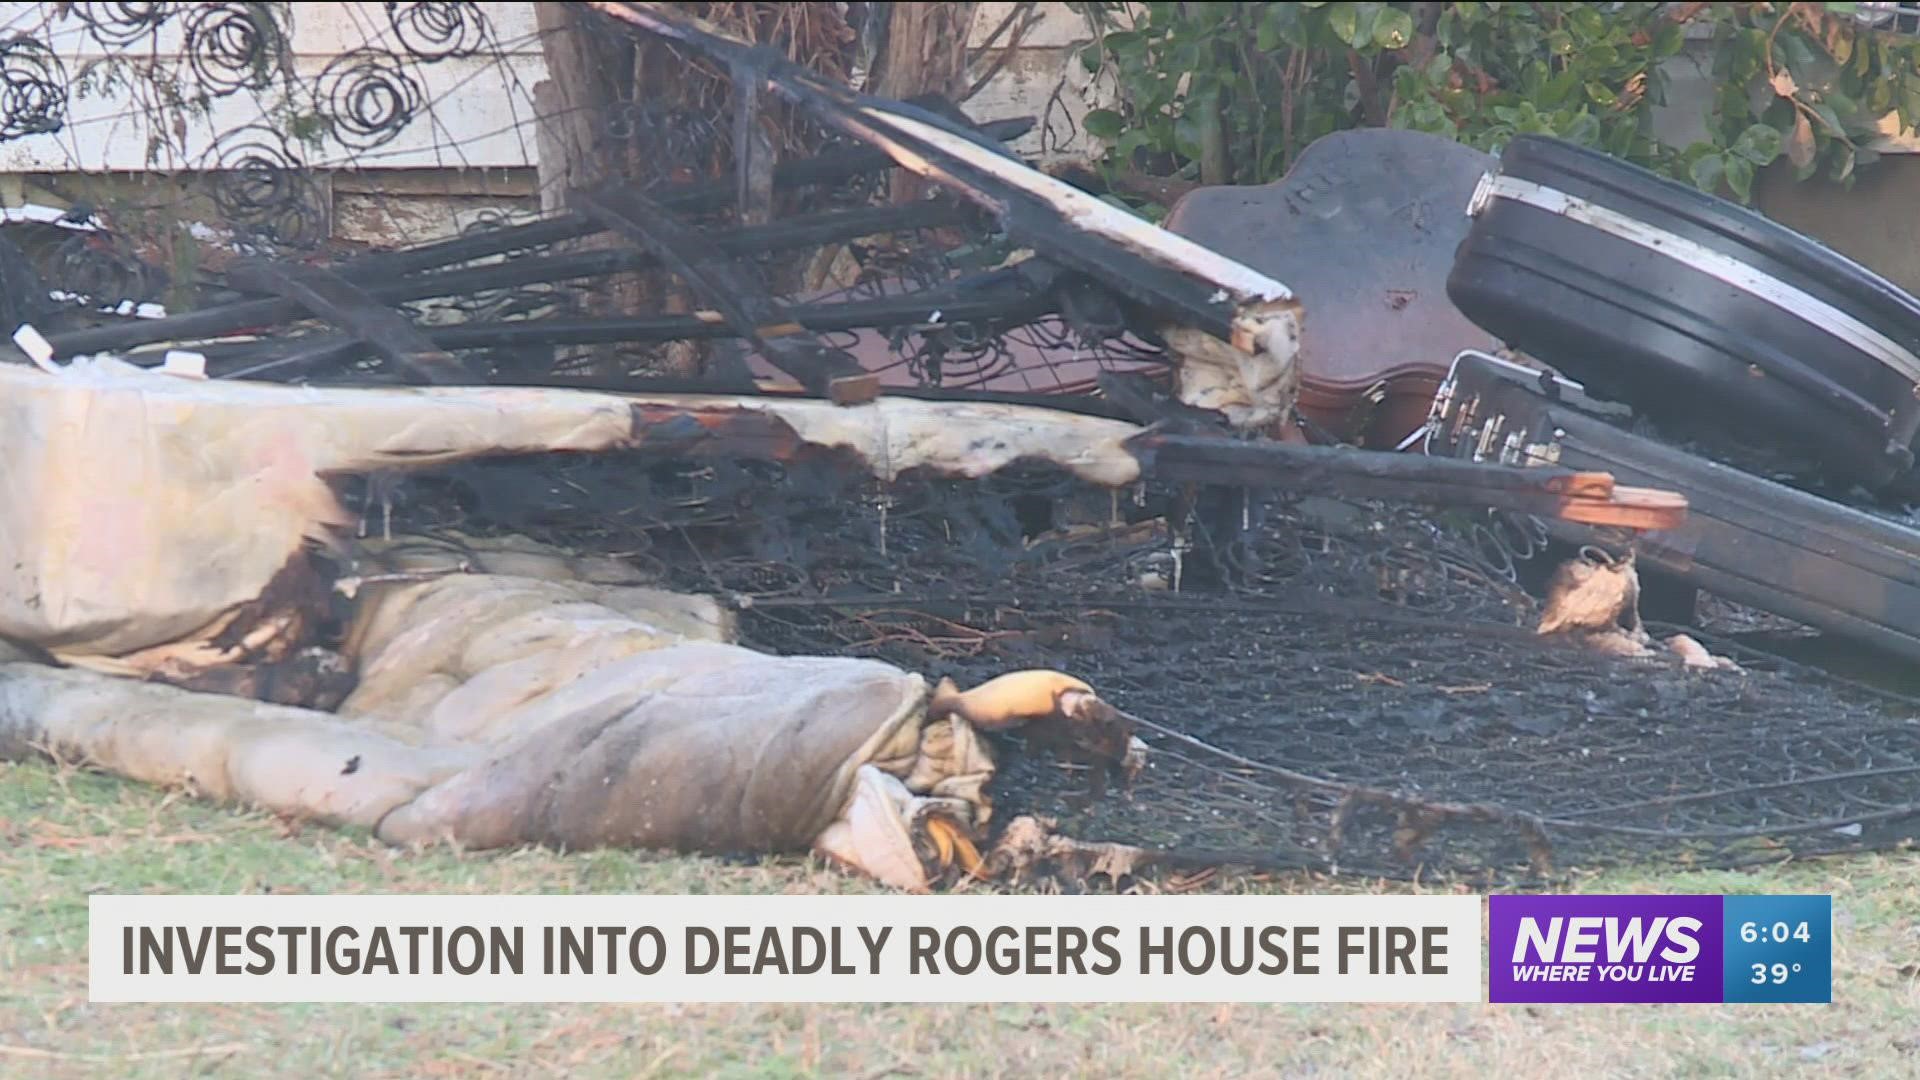 Emergency crews responded to an early morning fire in Rogers that left one person dead.